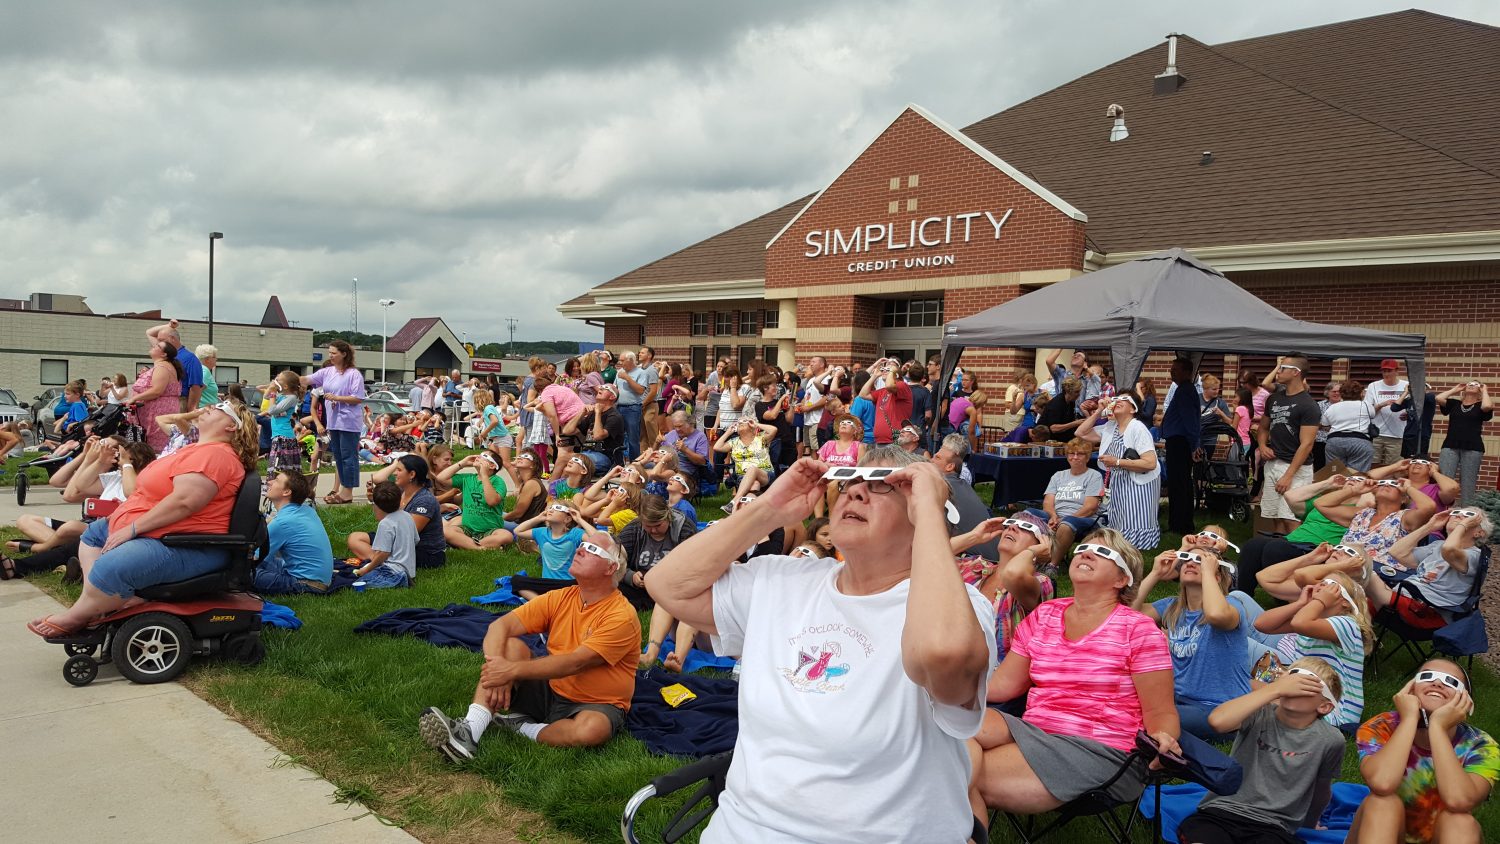 Simplicity Credit Union held an eclipse viewing party on Aug. 21.